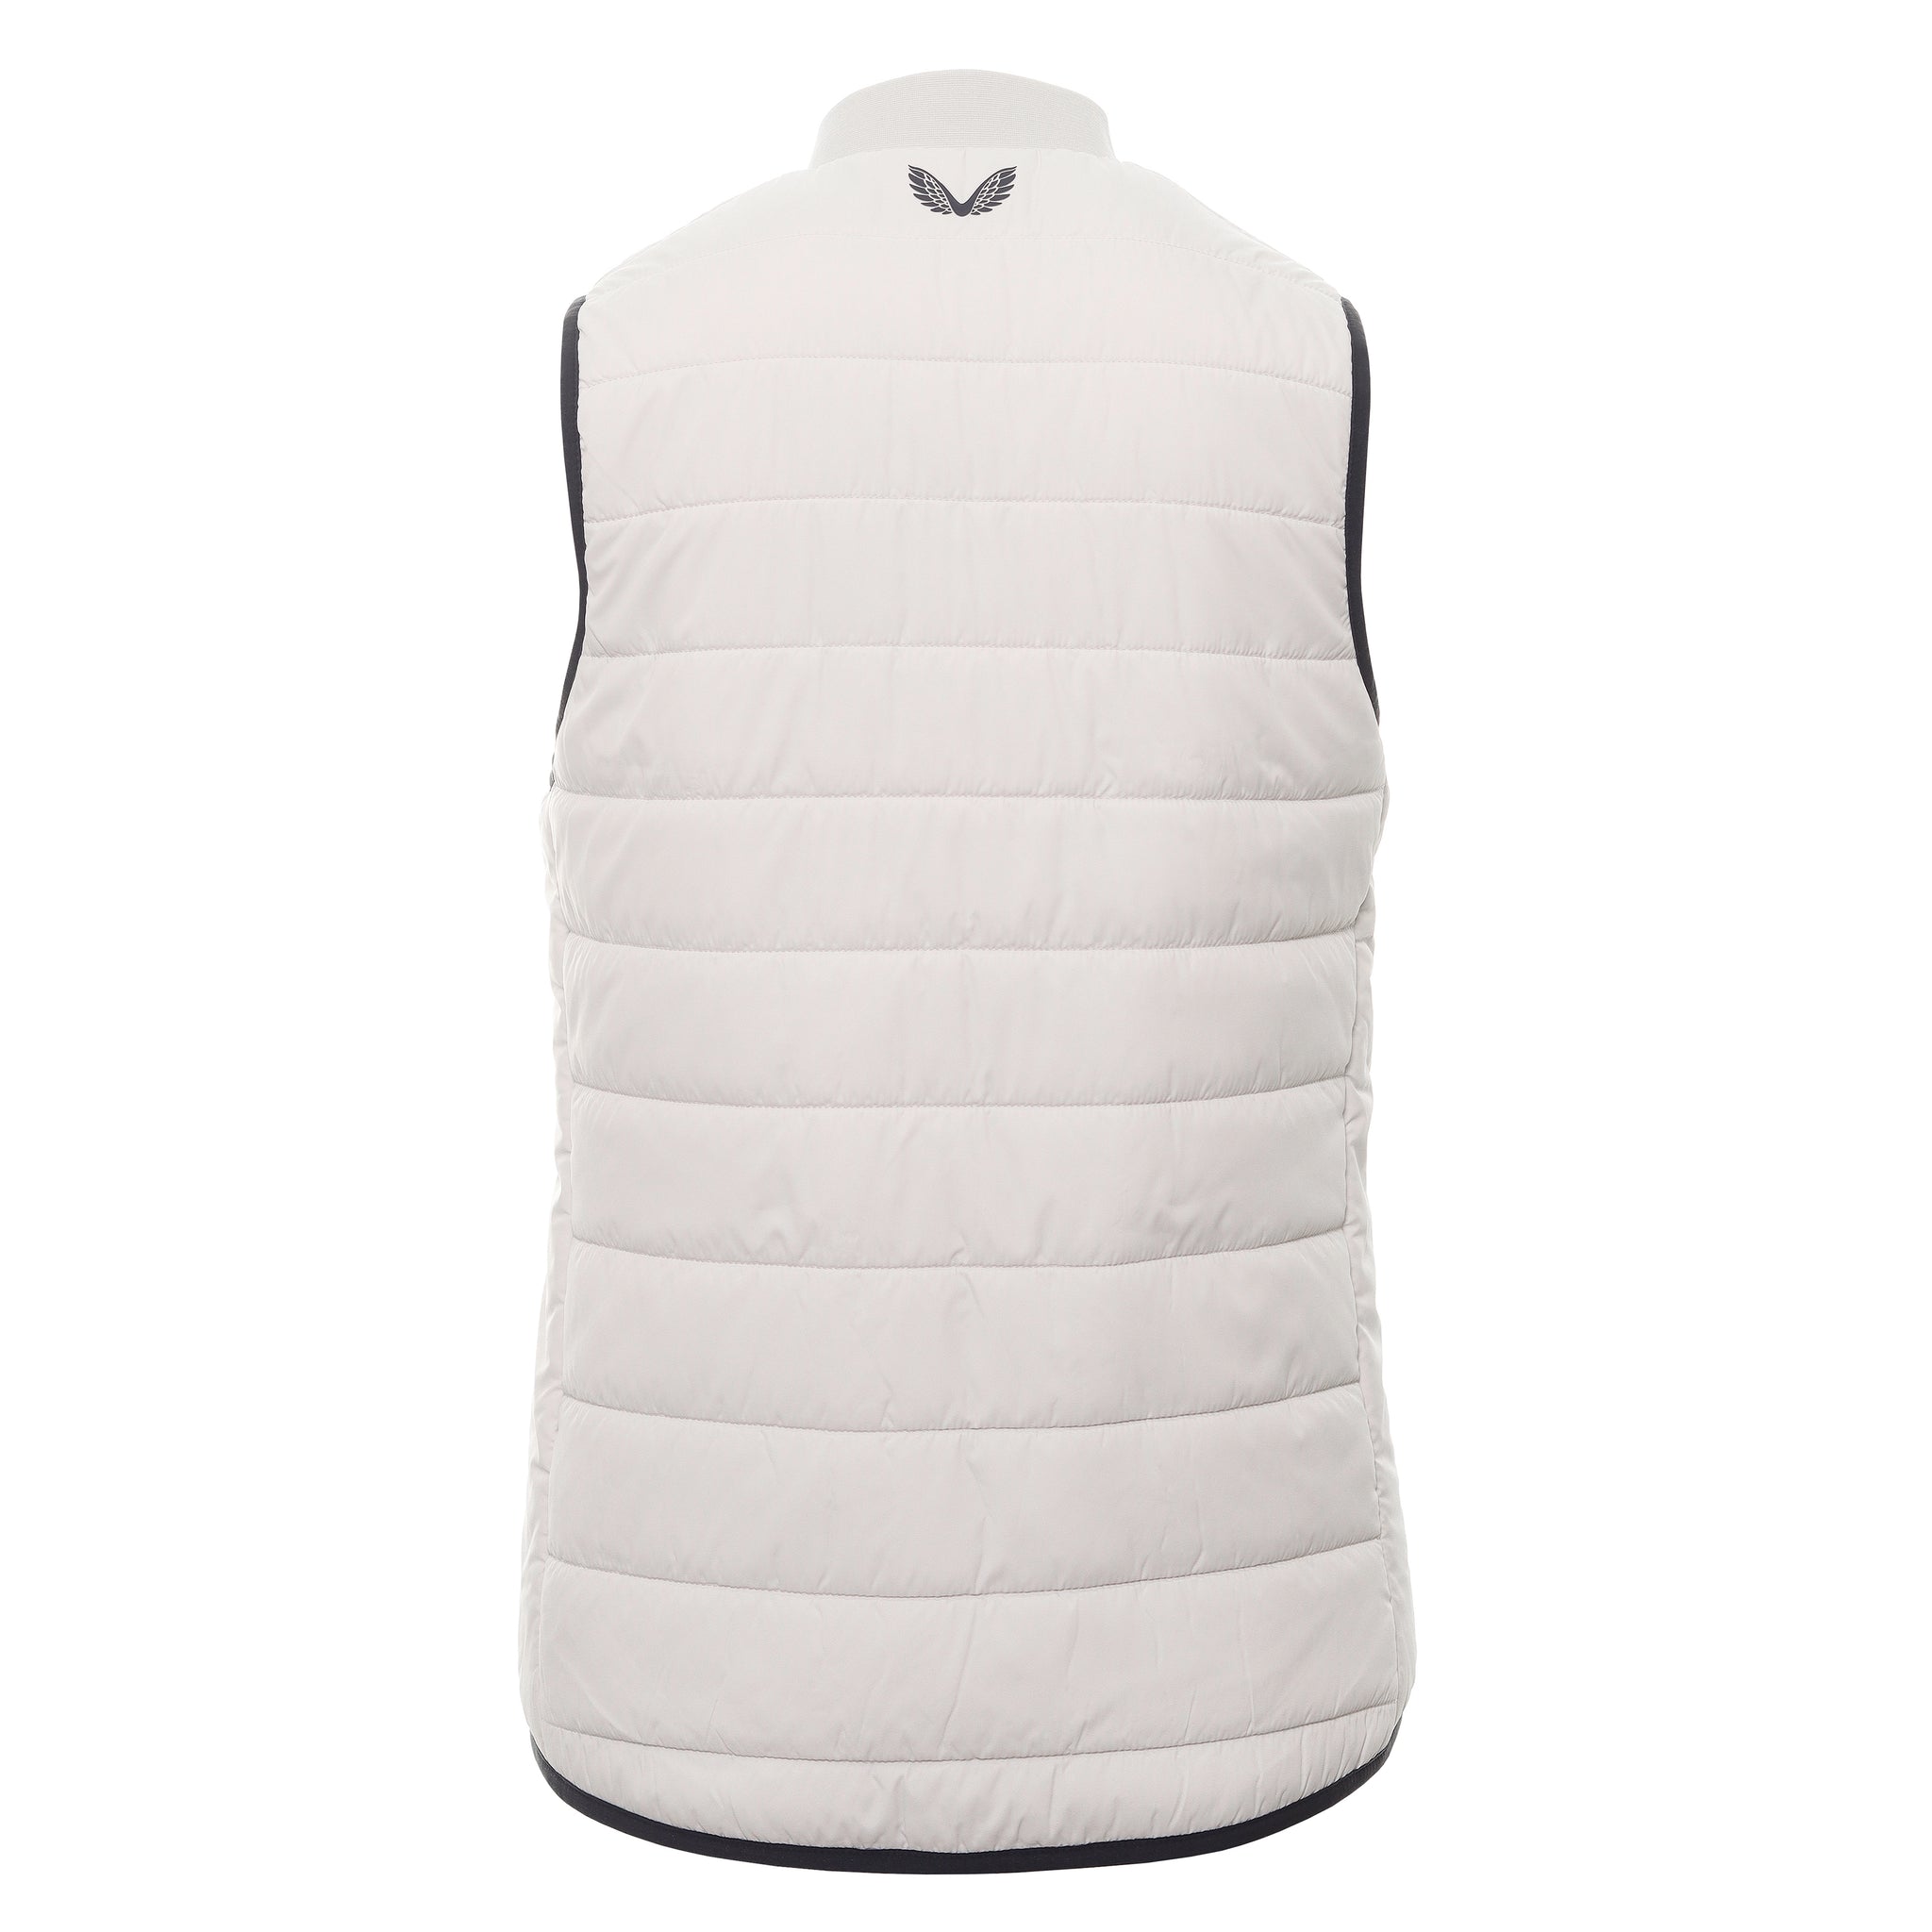 castore-golf-quilted-gilet-cm0772-stone-grey